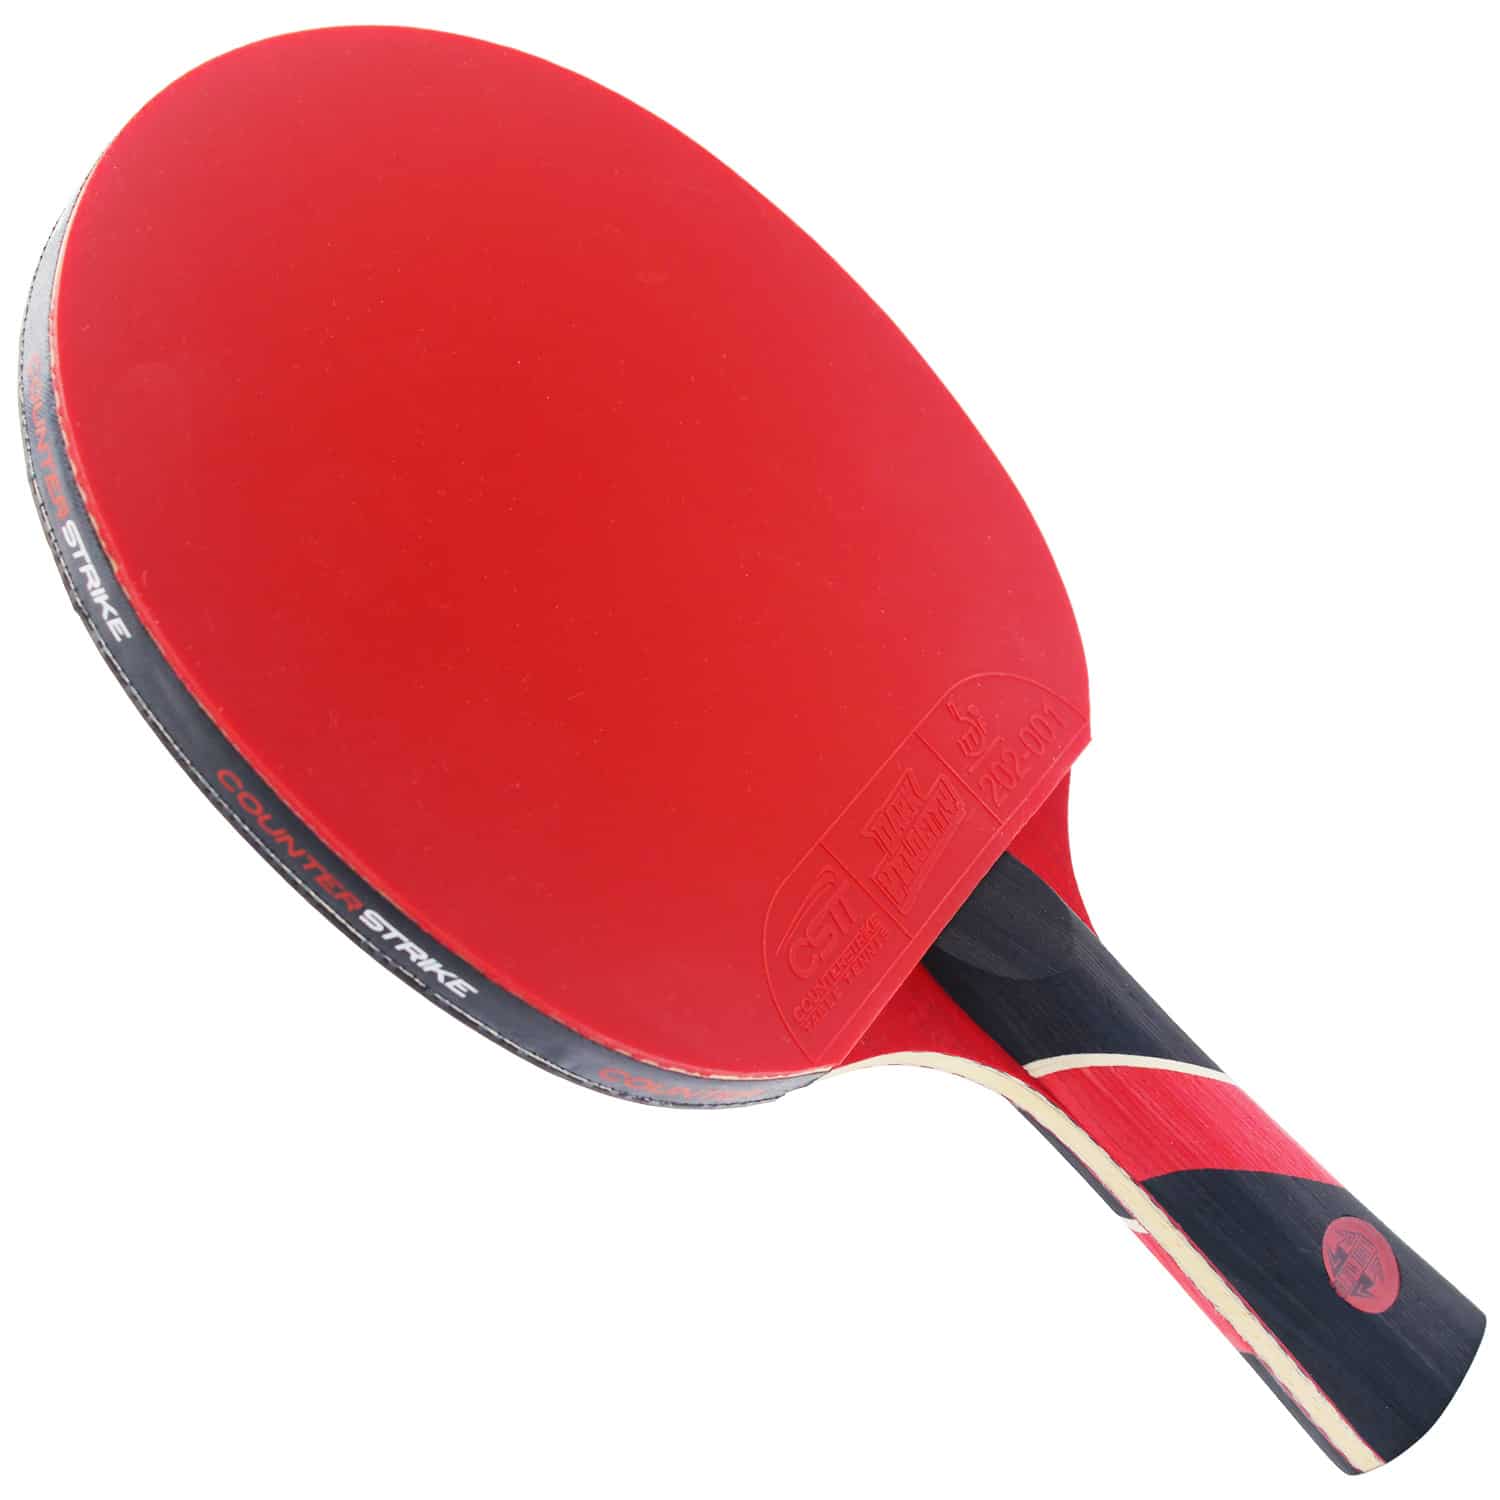 Professional Table Tennis Paddle Includes Hard Case & 6 Balls | Professional Ping Pong Paddle Carbon Table Tennis Paddle Pre-Assembled Paddle ITTF Approved Red Widow Paddle Bundle 